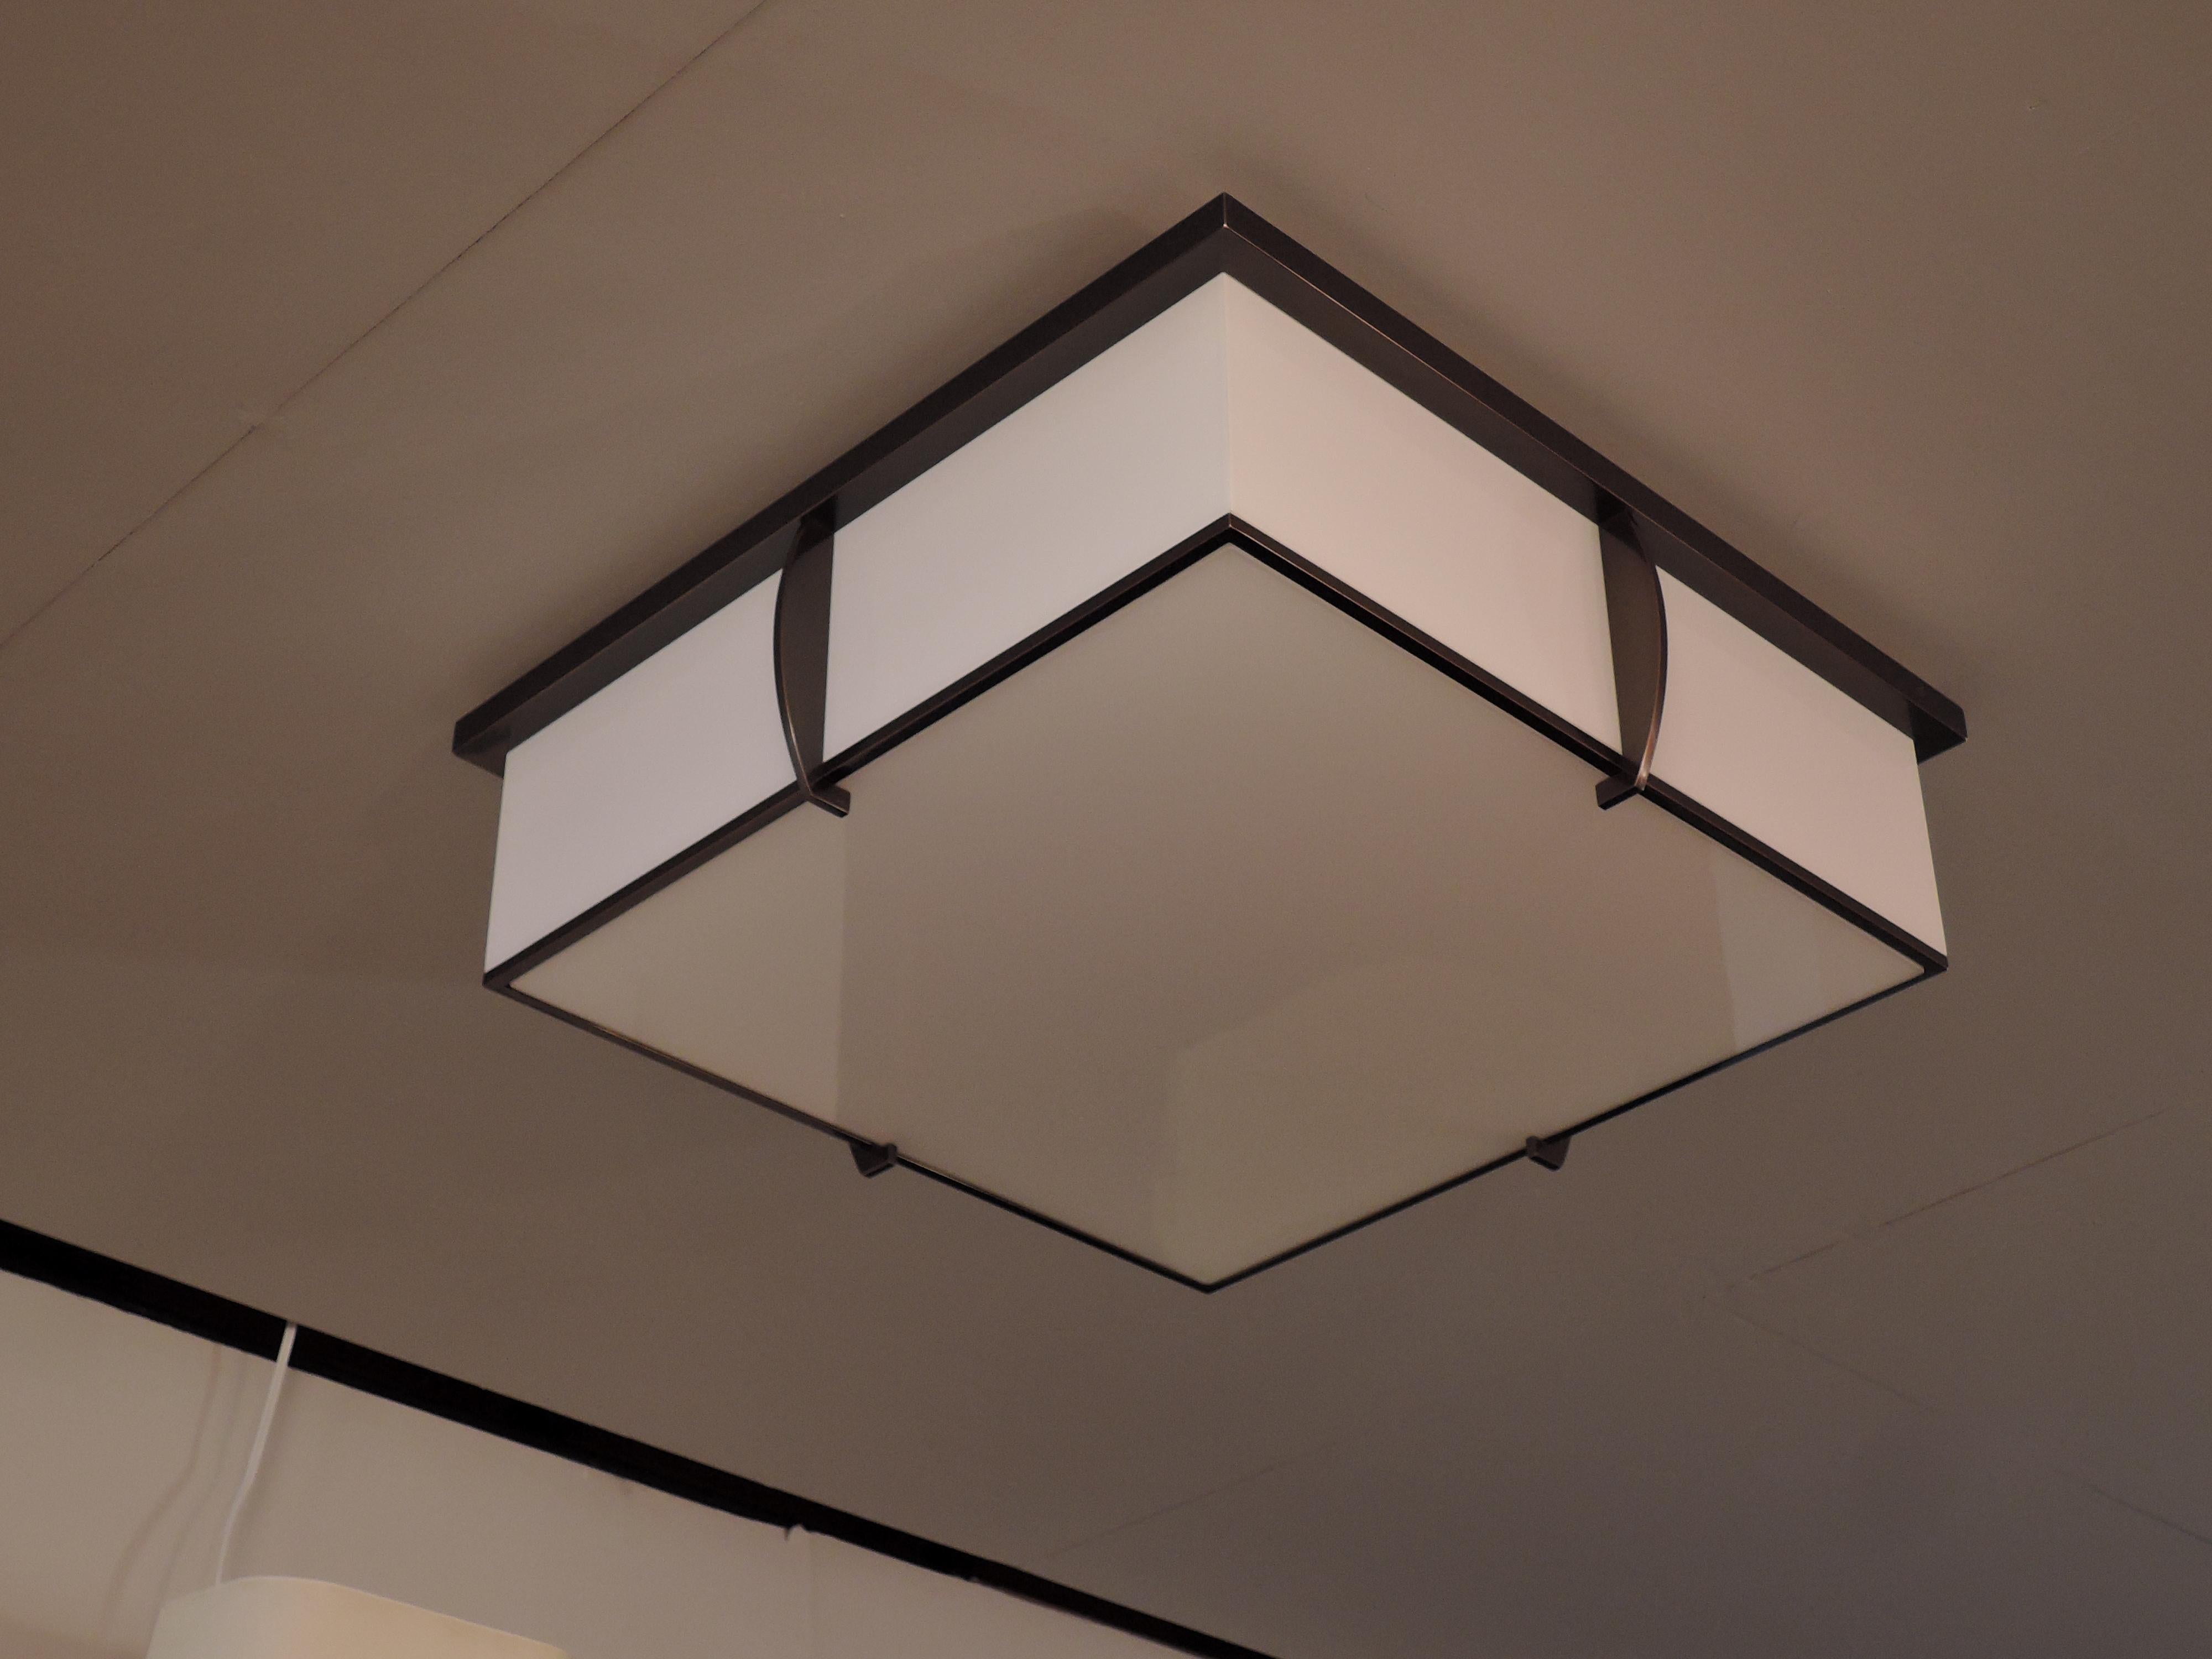 Mounted on a brown patina bronze square frame that holds the white enameled optical glass diffusers.
The flat square horizontal diffuser is easily removable in order to change the bulbs.
Glass diffusers are whiter than they appear on the